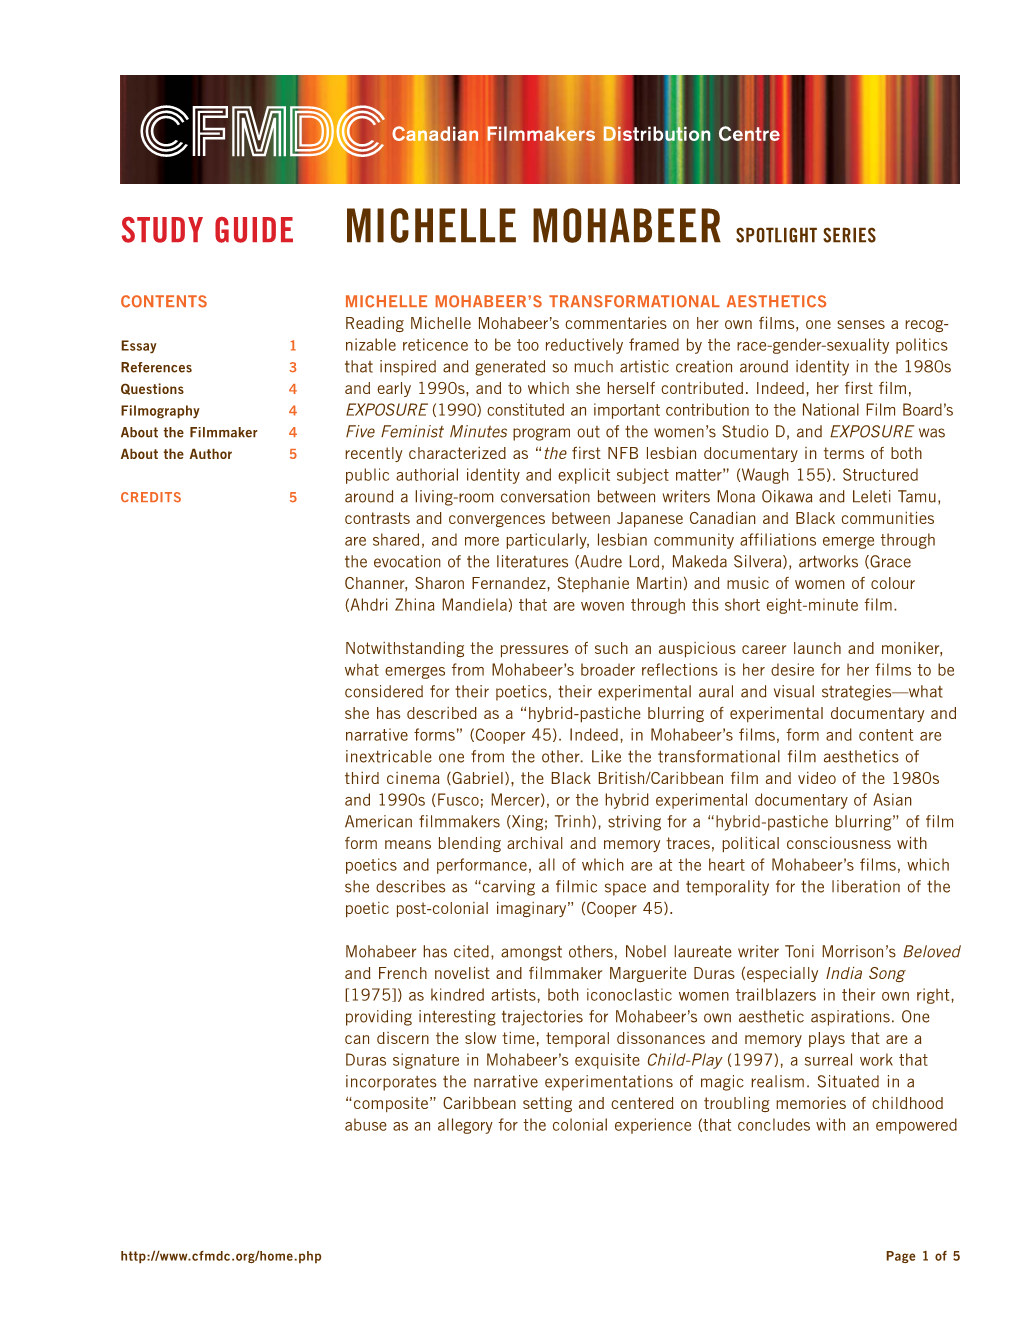 Study Guide Michelle Mohabeer Spotlight Series